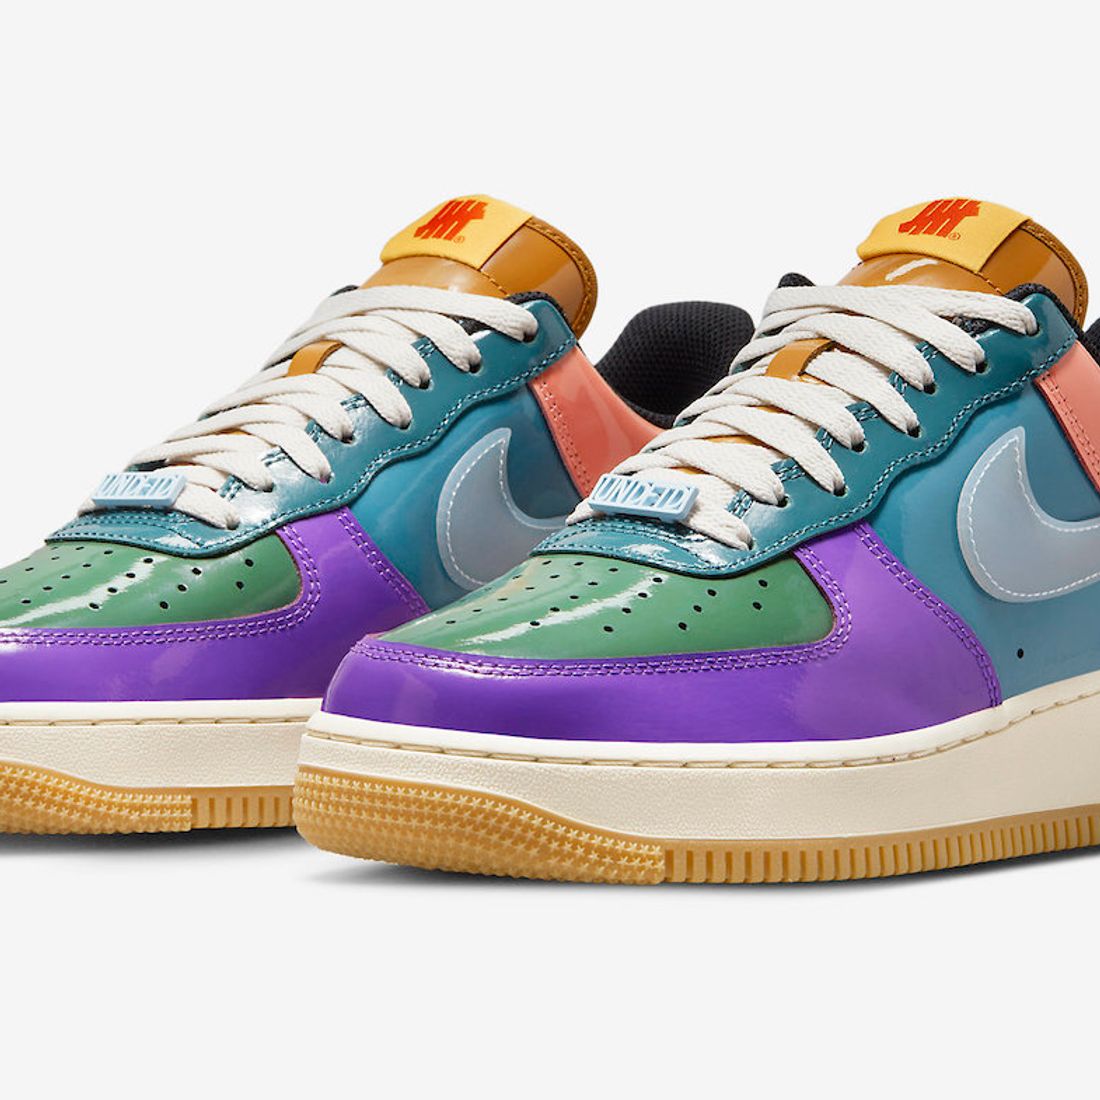 Undefeated Nike Dunk Low Air Force 1 Low 5 On It Release Date - SBD